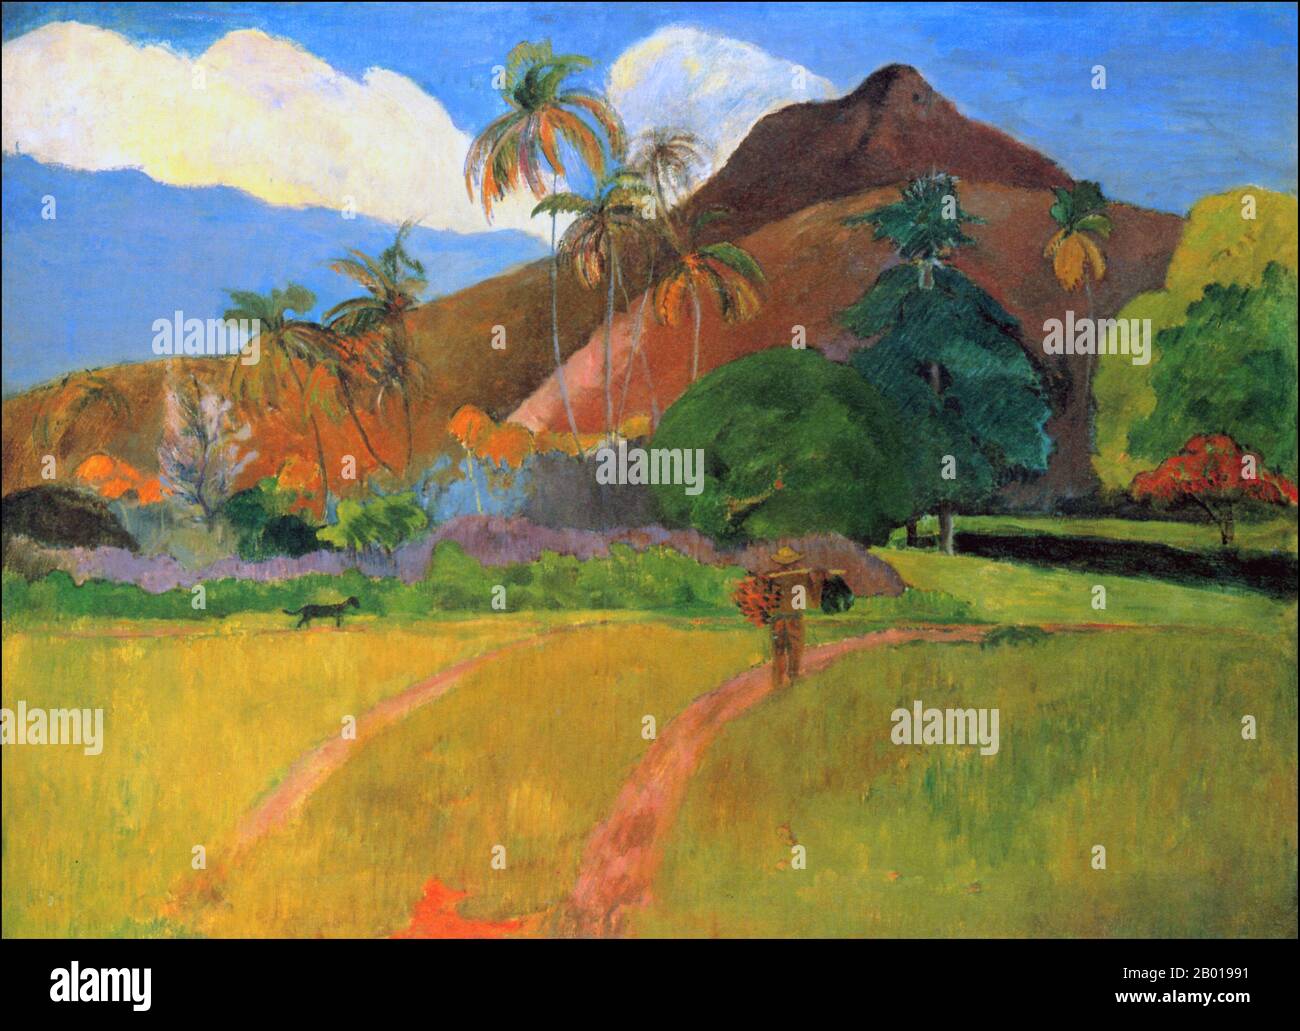 Tahiti: 'Montagnes Tahitiennes' (Tahitian Landscape). Oil on canvas painting by Paul Gauguin (7 June 1848 - 8 May 1903), 1891.  Paul Gauguin was born in Paris in 1848 and spent some of his childhood in Peru. He worked as a stockbroker with little success, and suffered from bouts of severe depression. He also painted. In 1891, Gauguin, frustrated by lack of recognition at home and financially destitute, sailed to the tropics to escape European civilization and 'everything that is artificial and conventional'. His time there was the subject of much interest both then and in modern times. Stock Photo